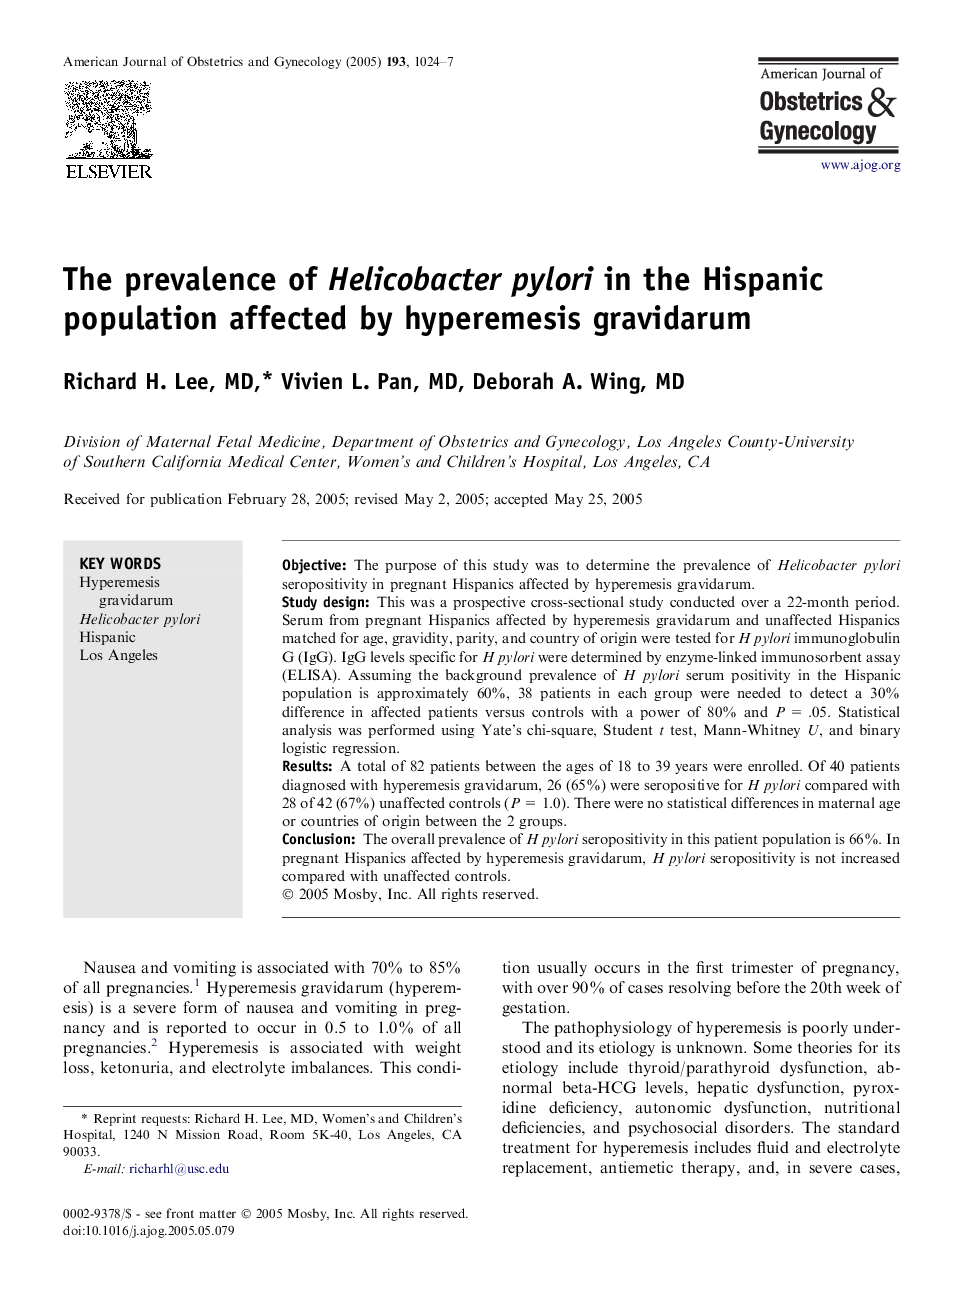 The prevalence of Helicobacter pylori in the Hispanic population affected by hyperemesis gravidarum